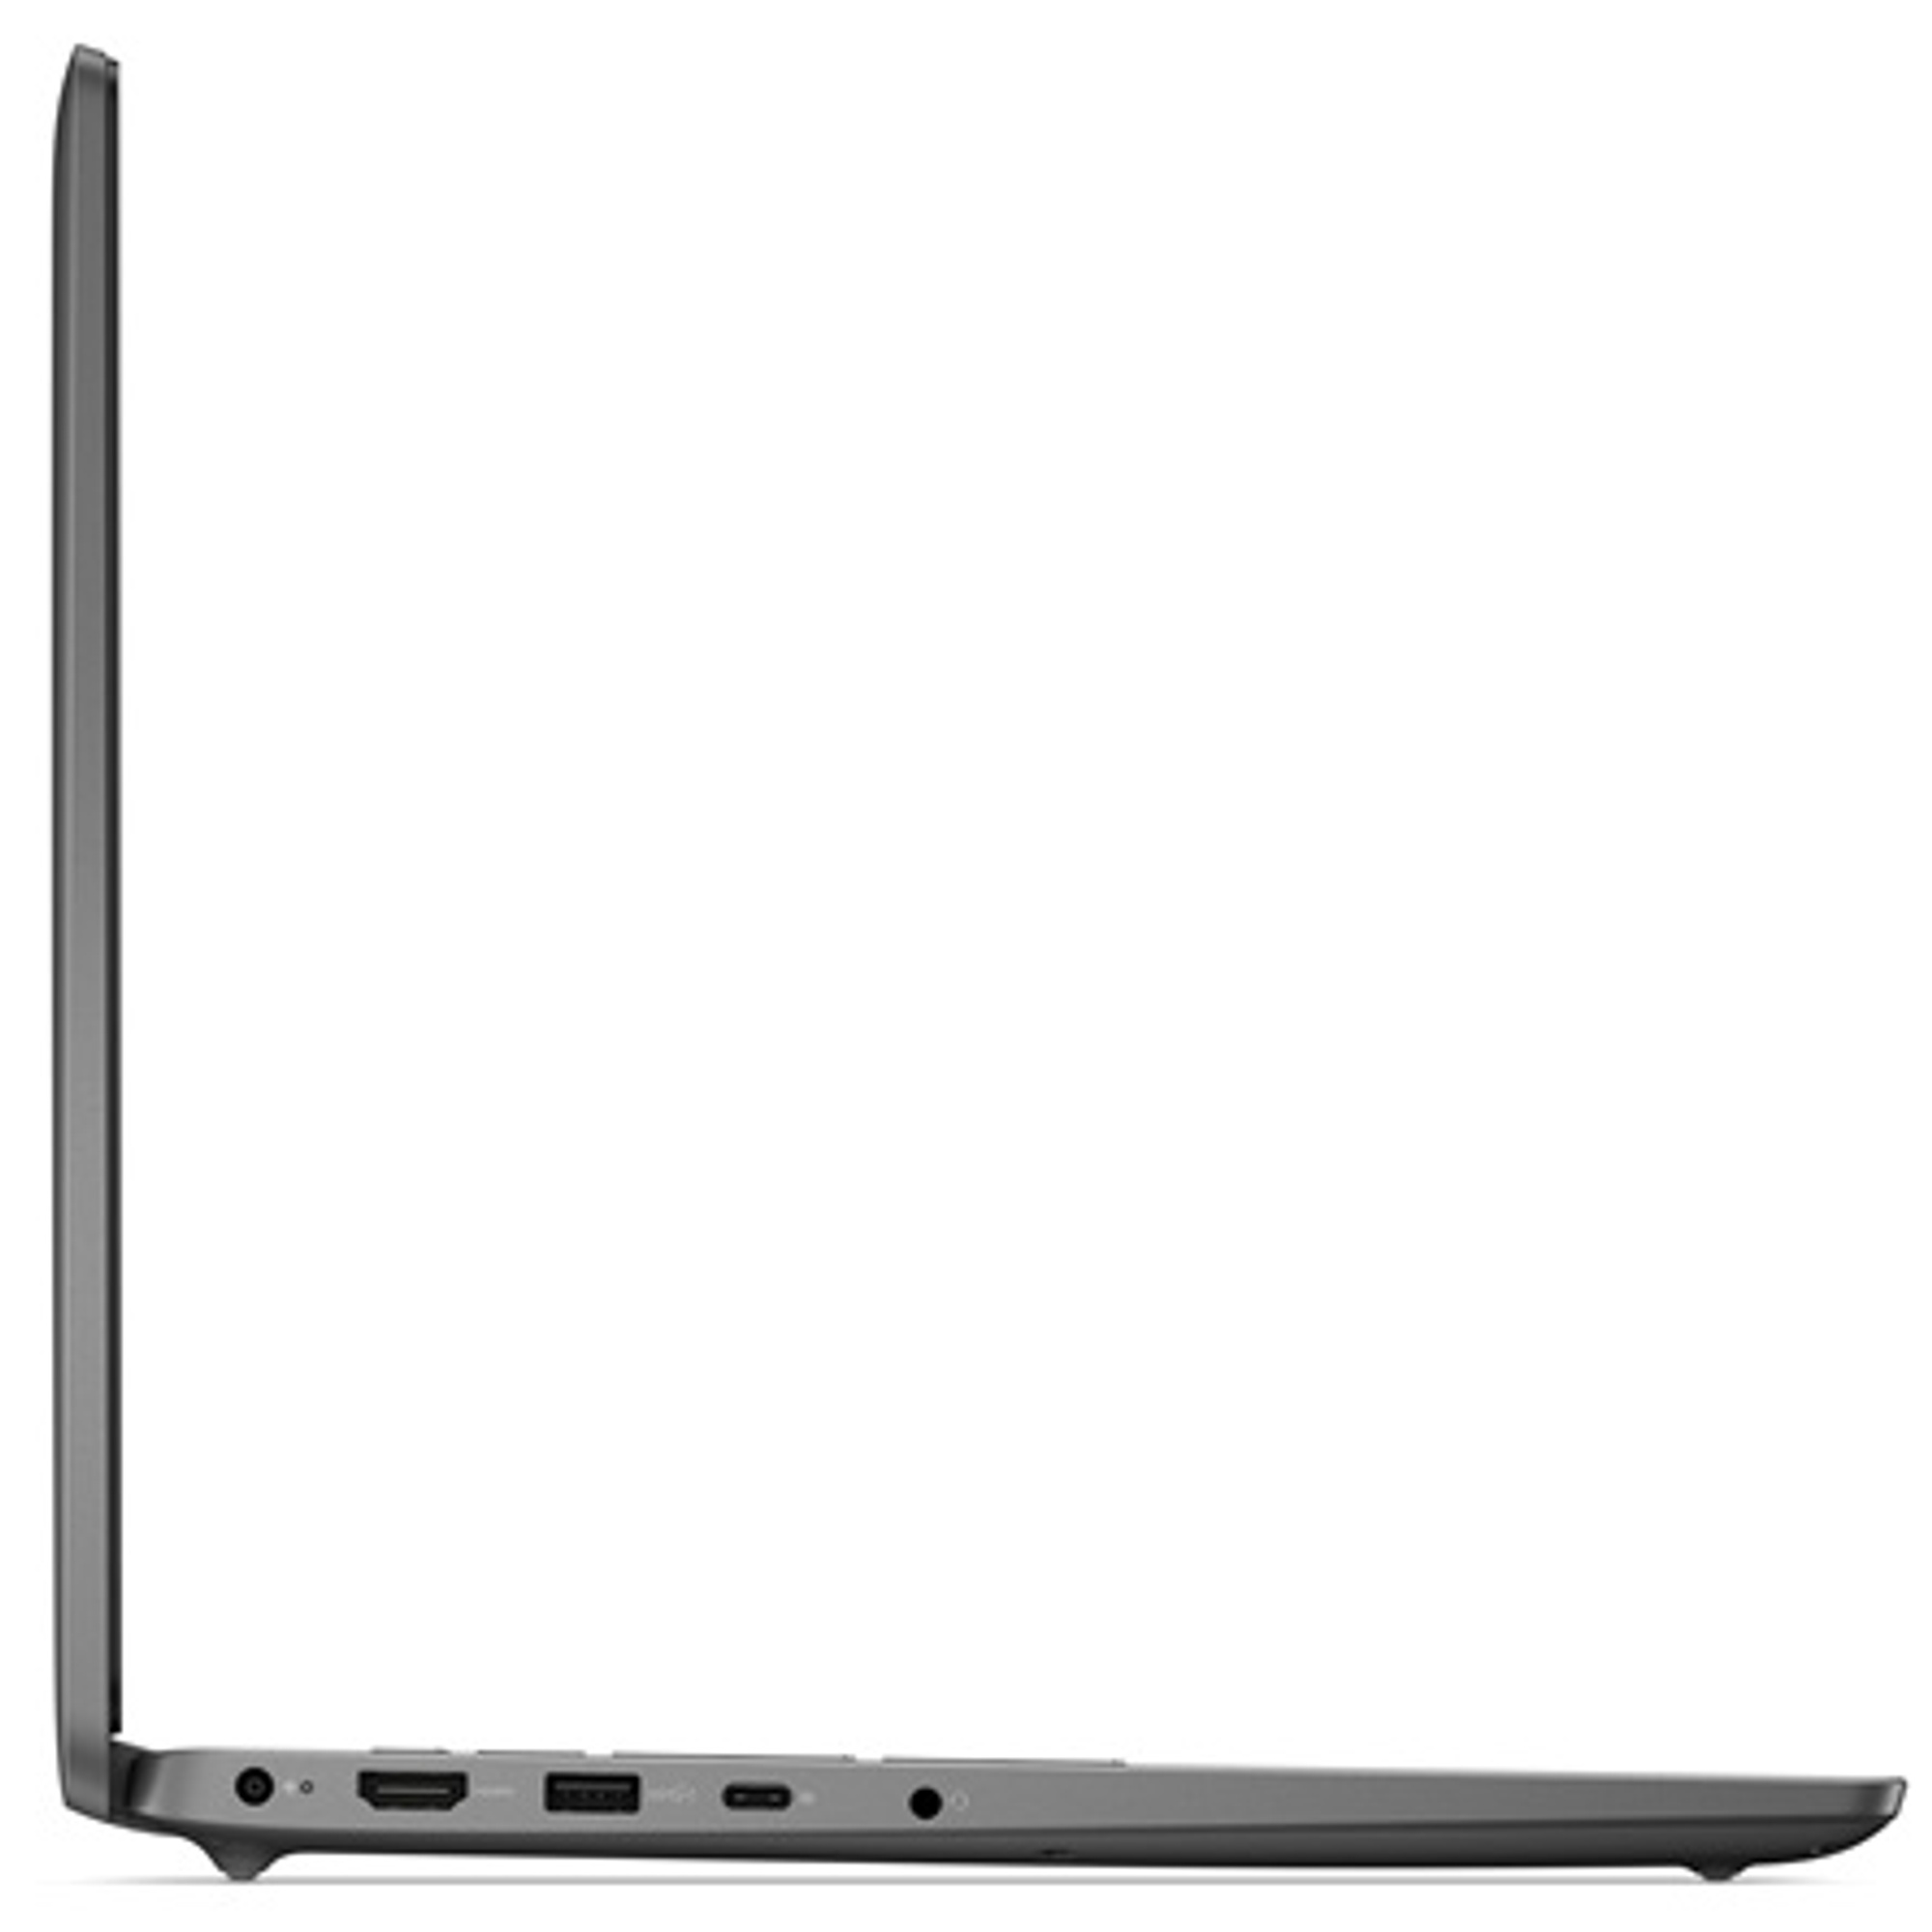 DELL L3540-19 Laptop / Notebook 4